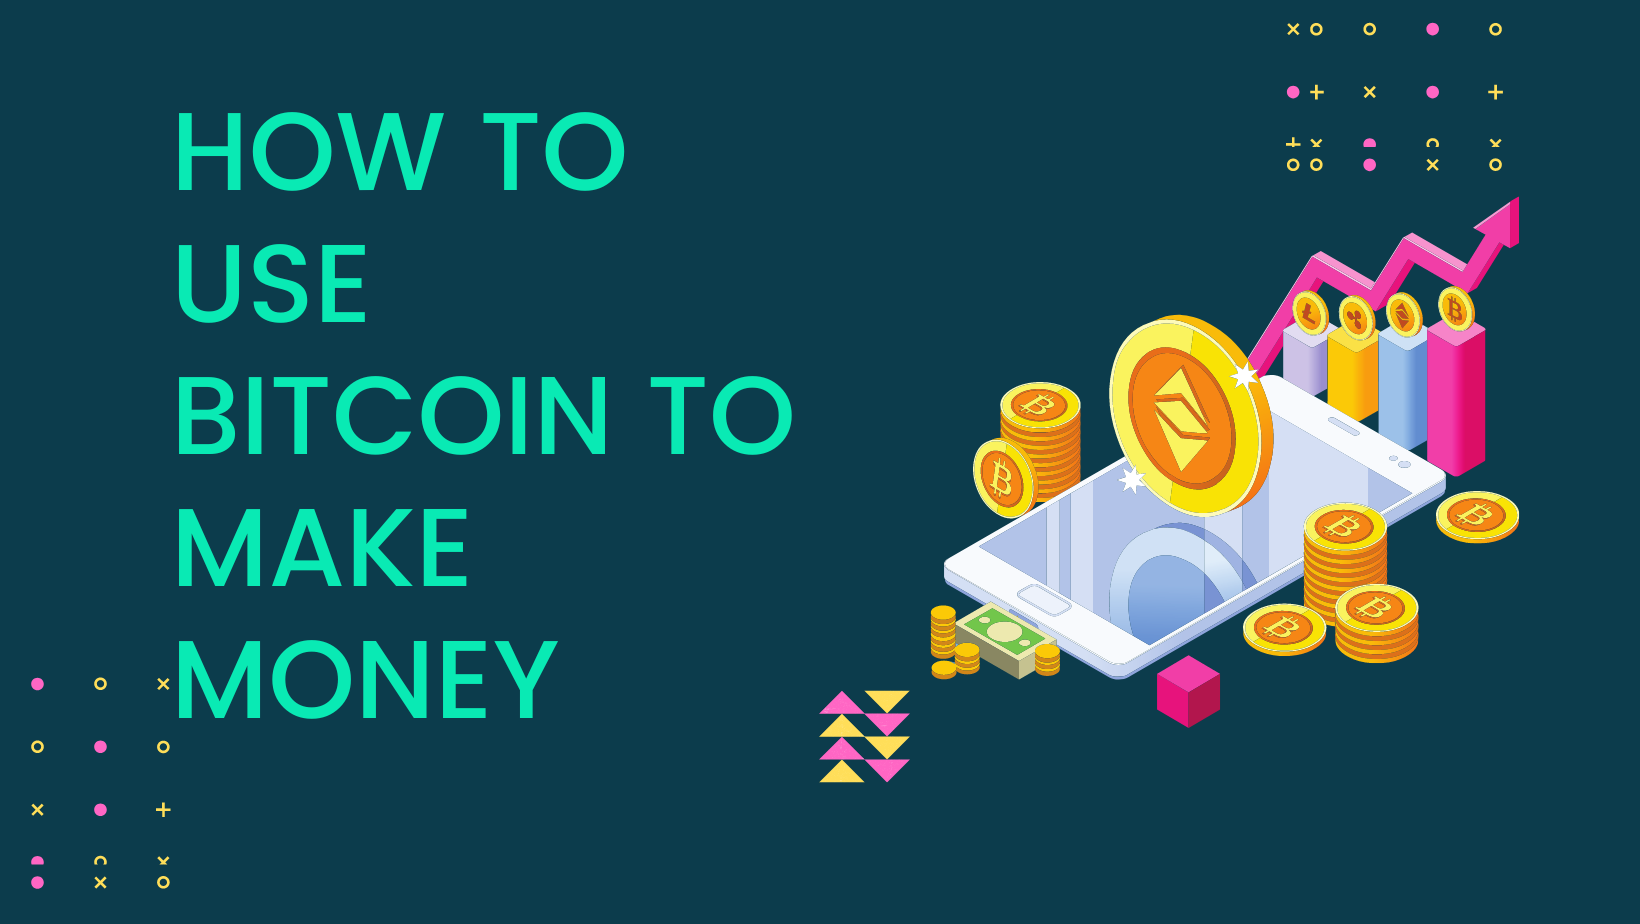 How to Use Bitcoin to Make Money